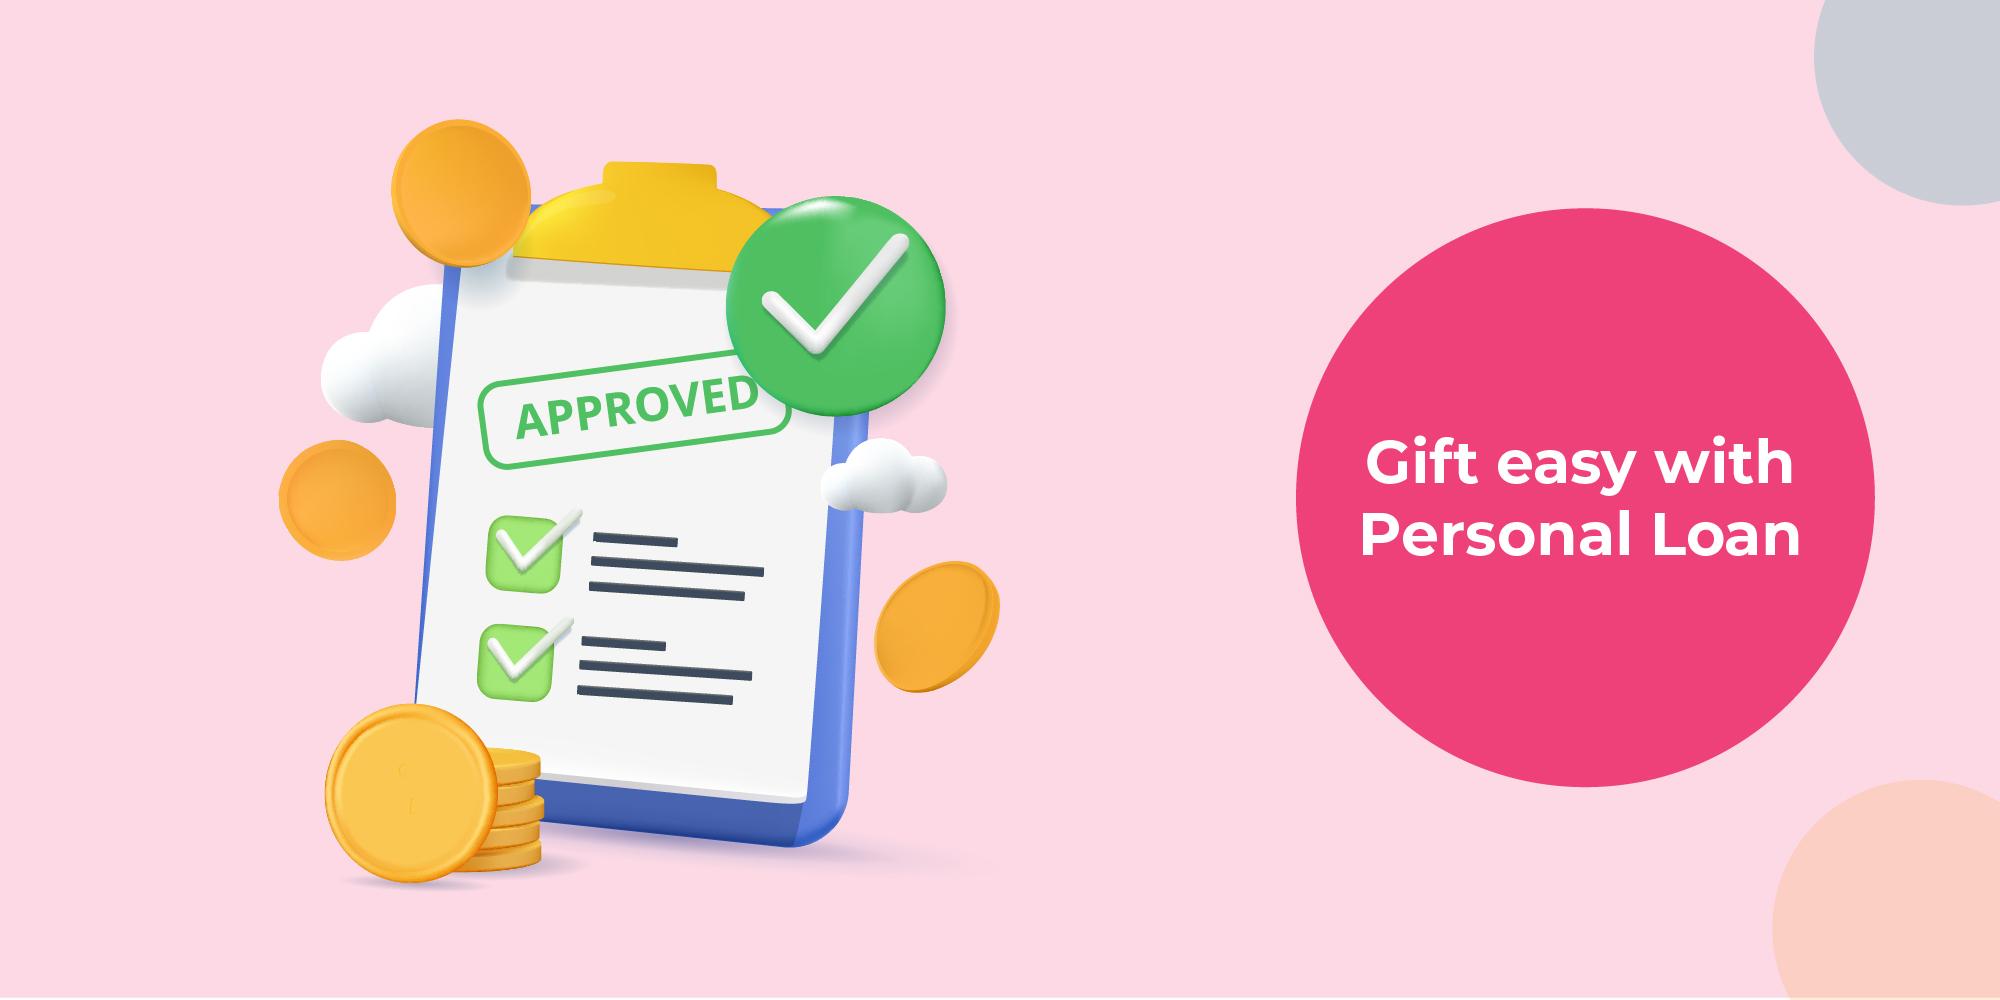 Personal Loan for Gifting: 5 Ways To Make Your Celebration Special